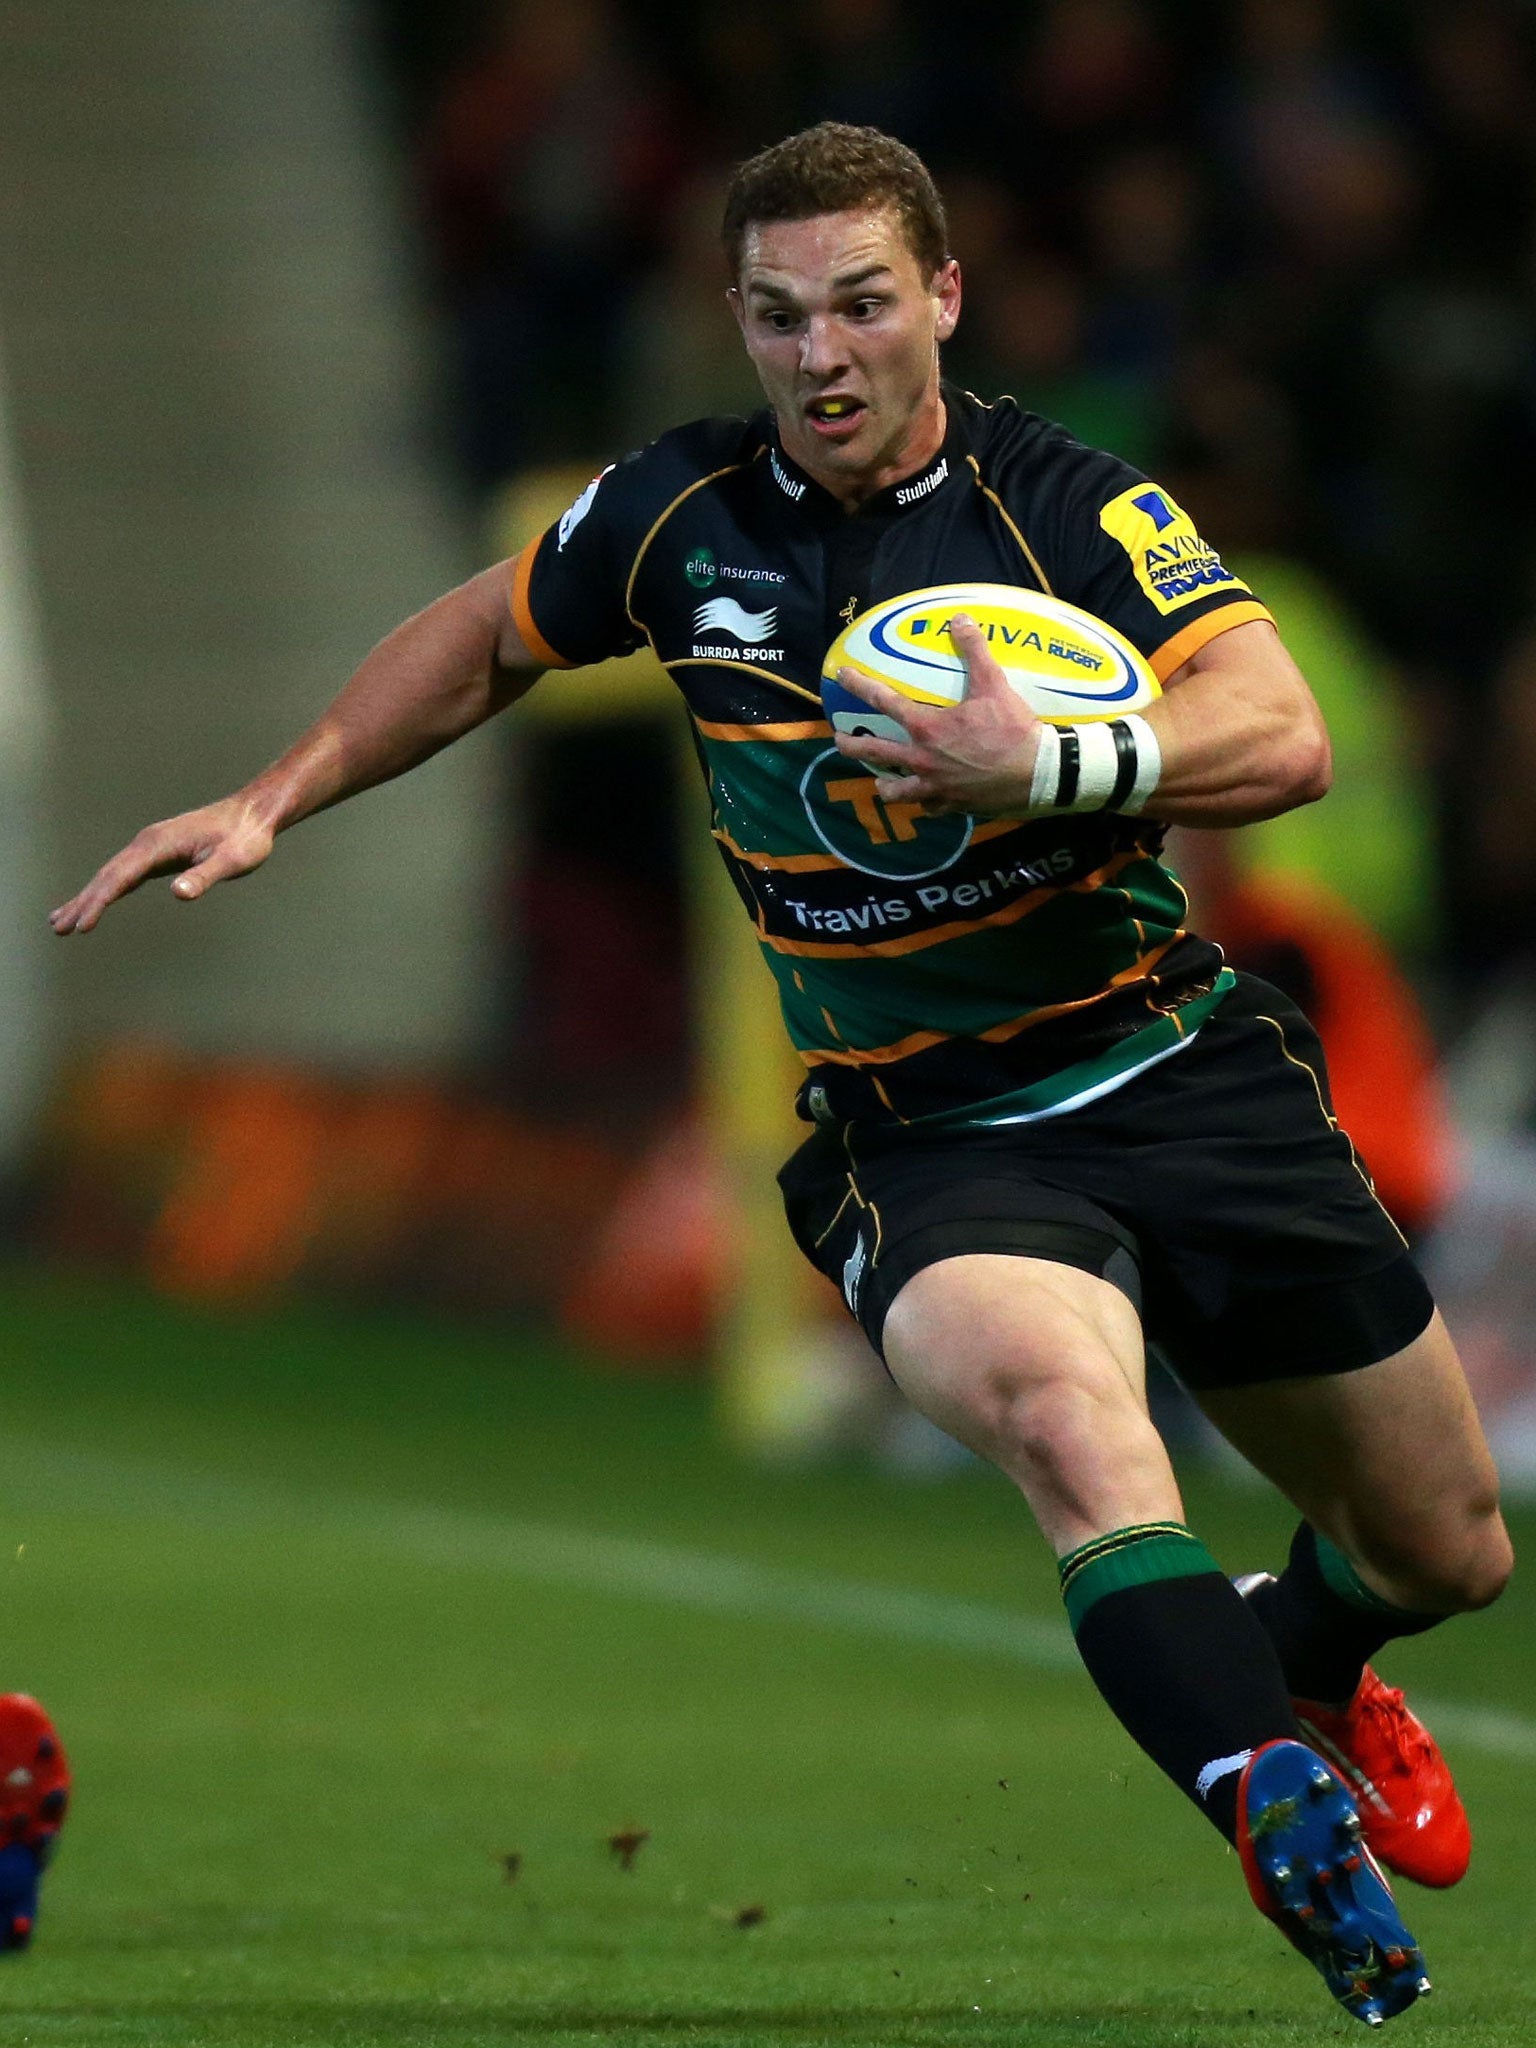 Northampton have Lions star George North available